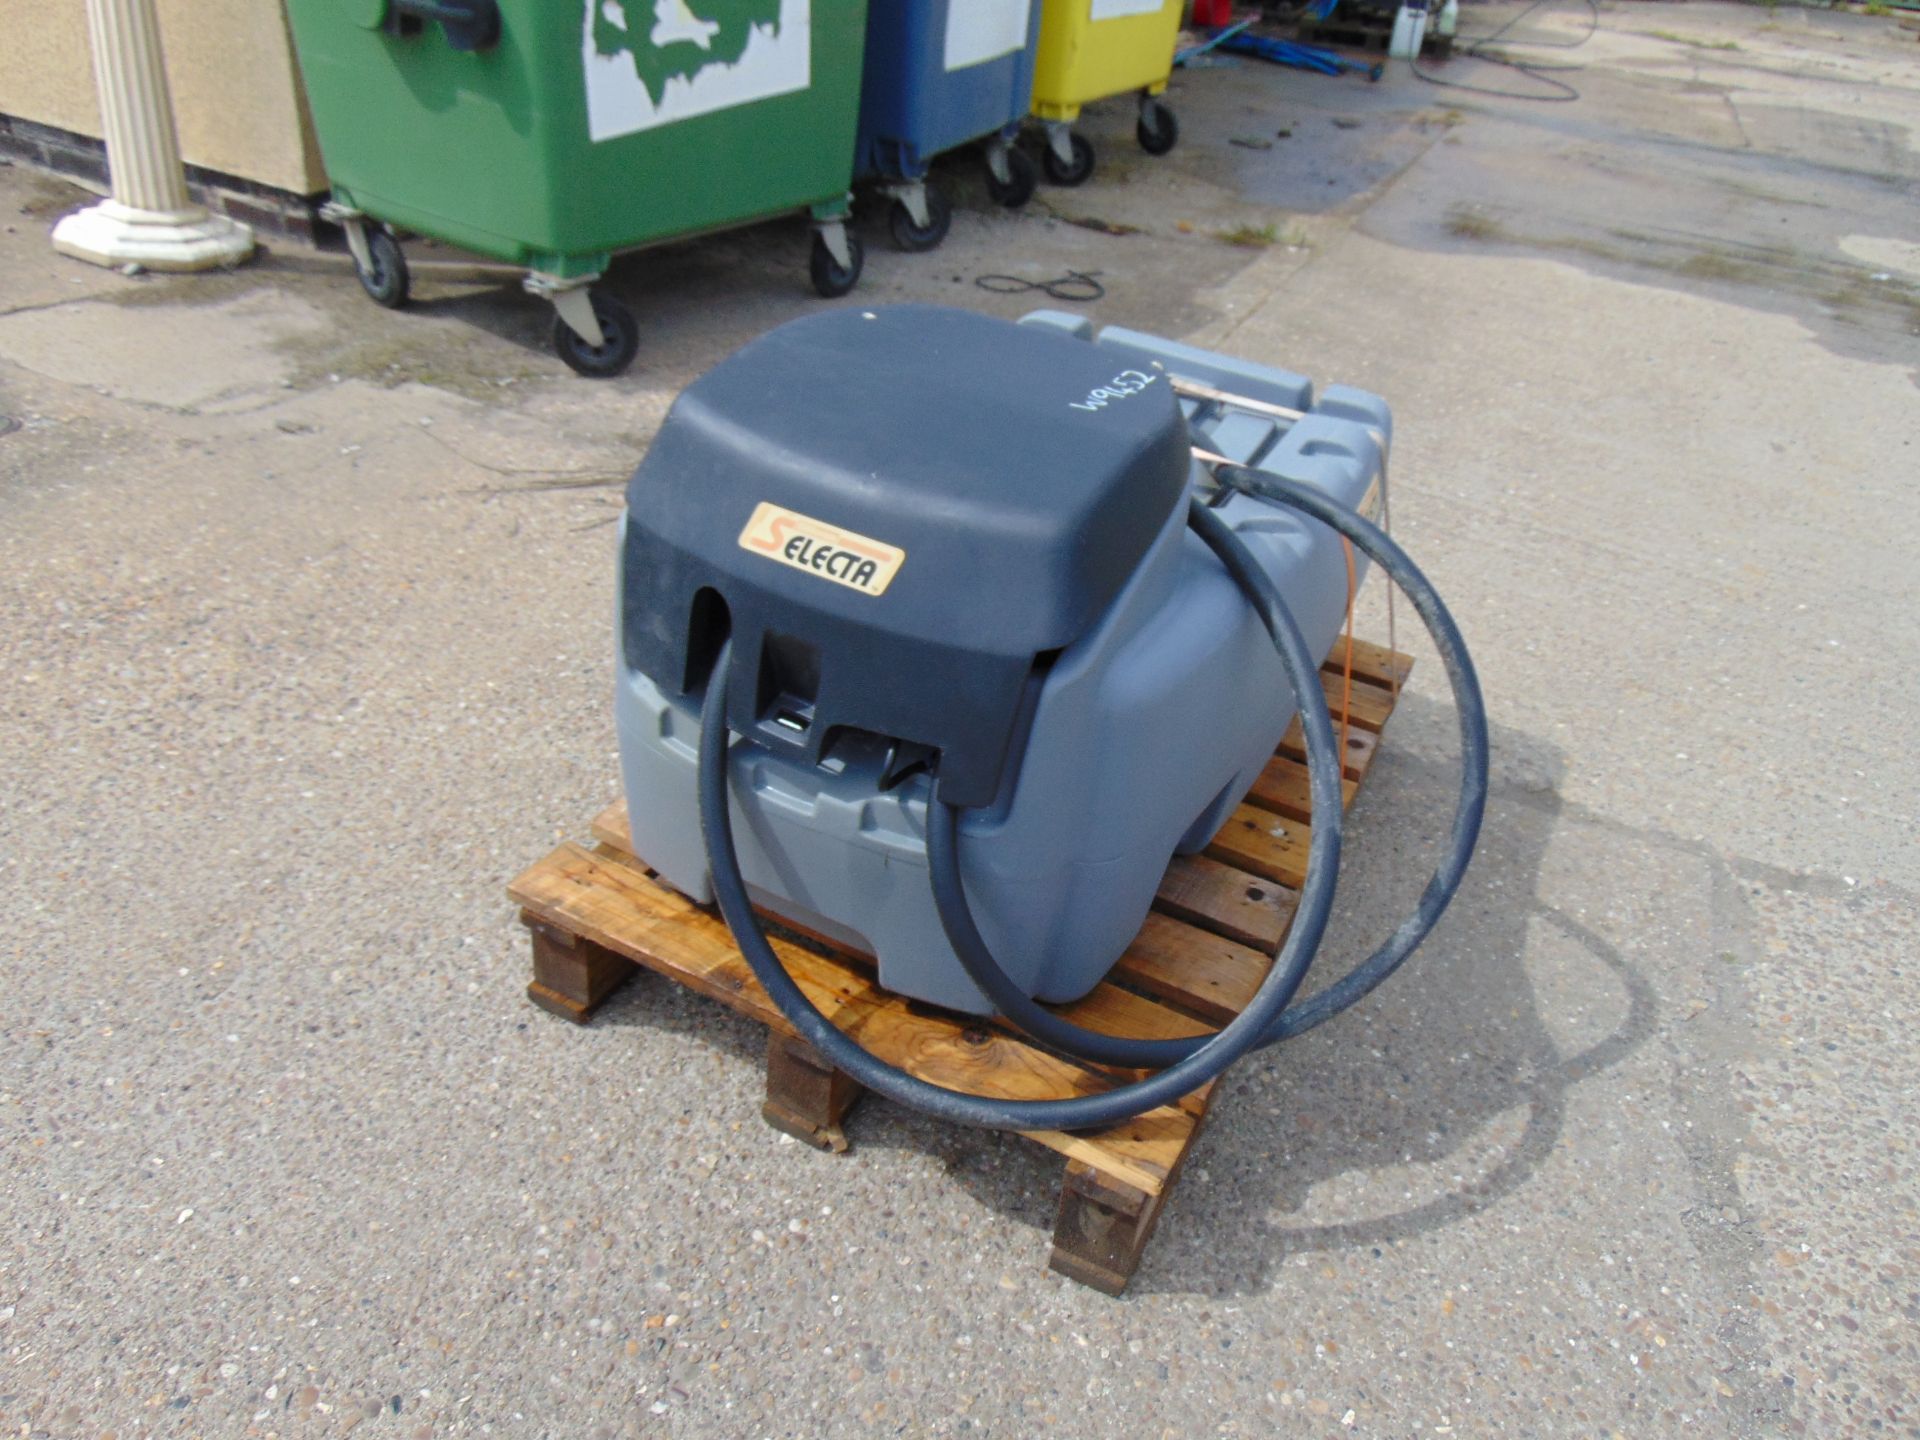 Selecta 200 Litre 50 Gall Portable Refuel Tank c/w 12Volt Pump Hose and Automatic Refuelling Nozzle - Image 14 of 14